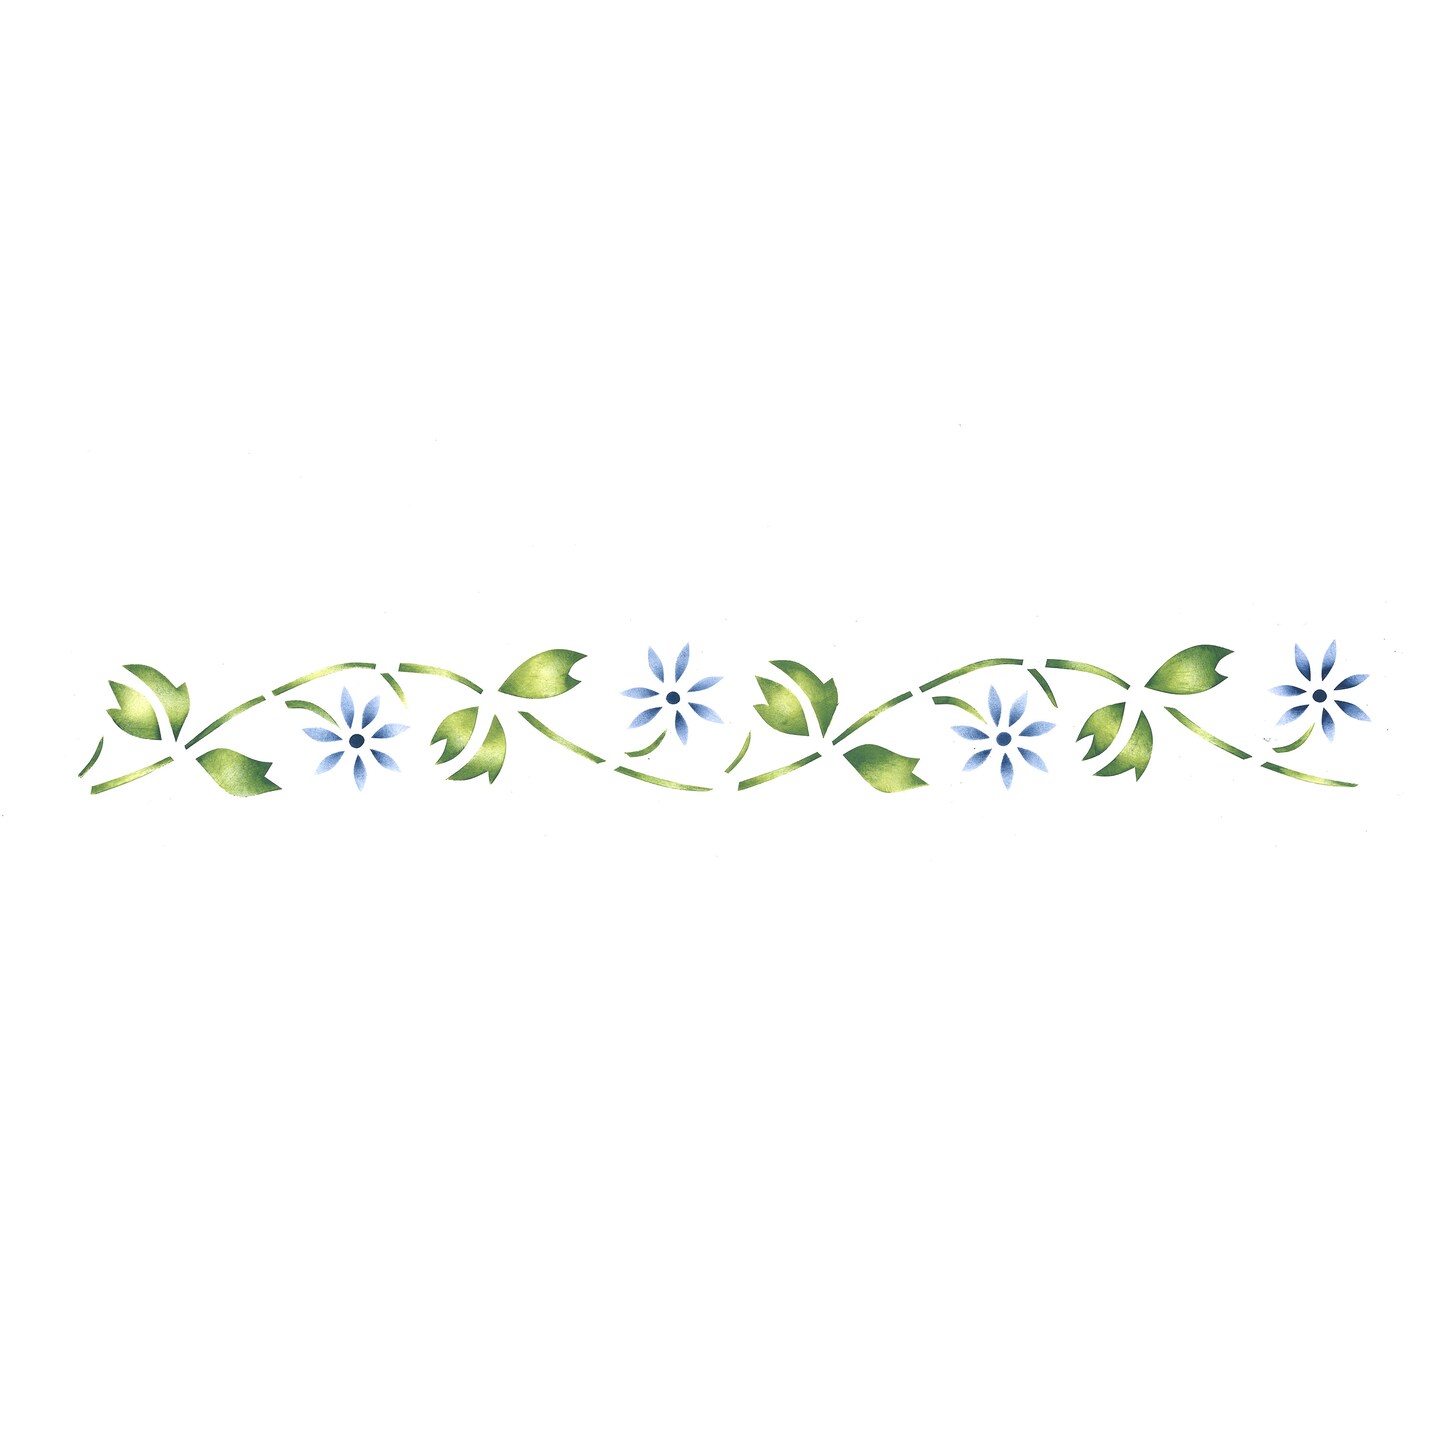 Small Floral Wall Stencil Border, 016 by Designer Stencils, Floral  Stencils, Reusable Art Craft Stencils for Painting on Walls, Canvas, Wood, Reusable Plastic Paint Stencil for Home Makeover